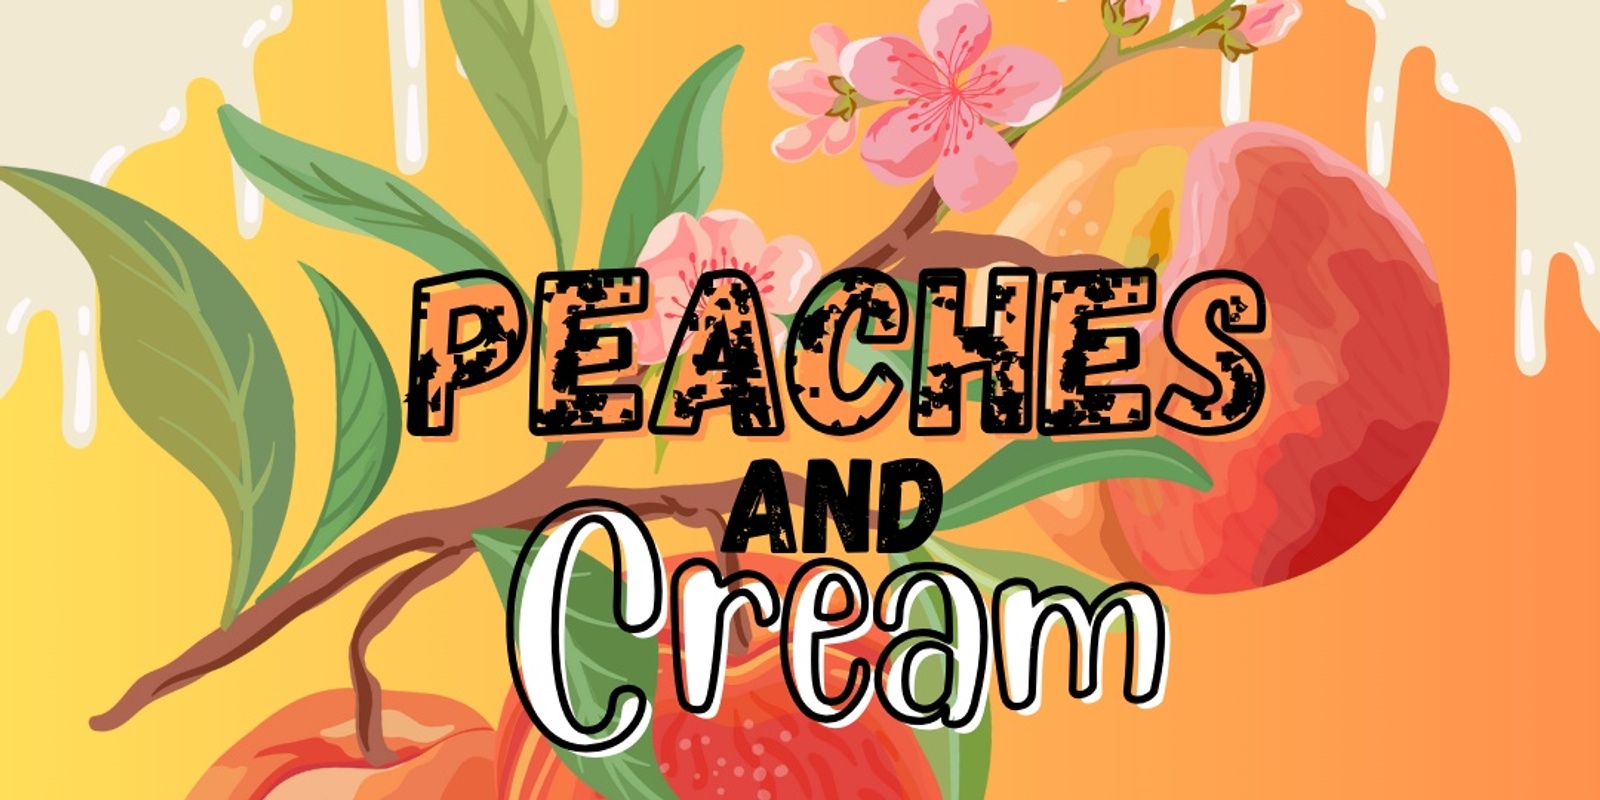 Banner image for Peaches and Cream Variety Show 